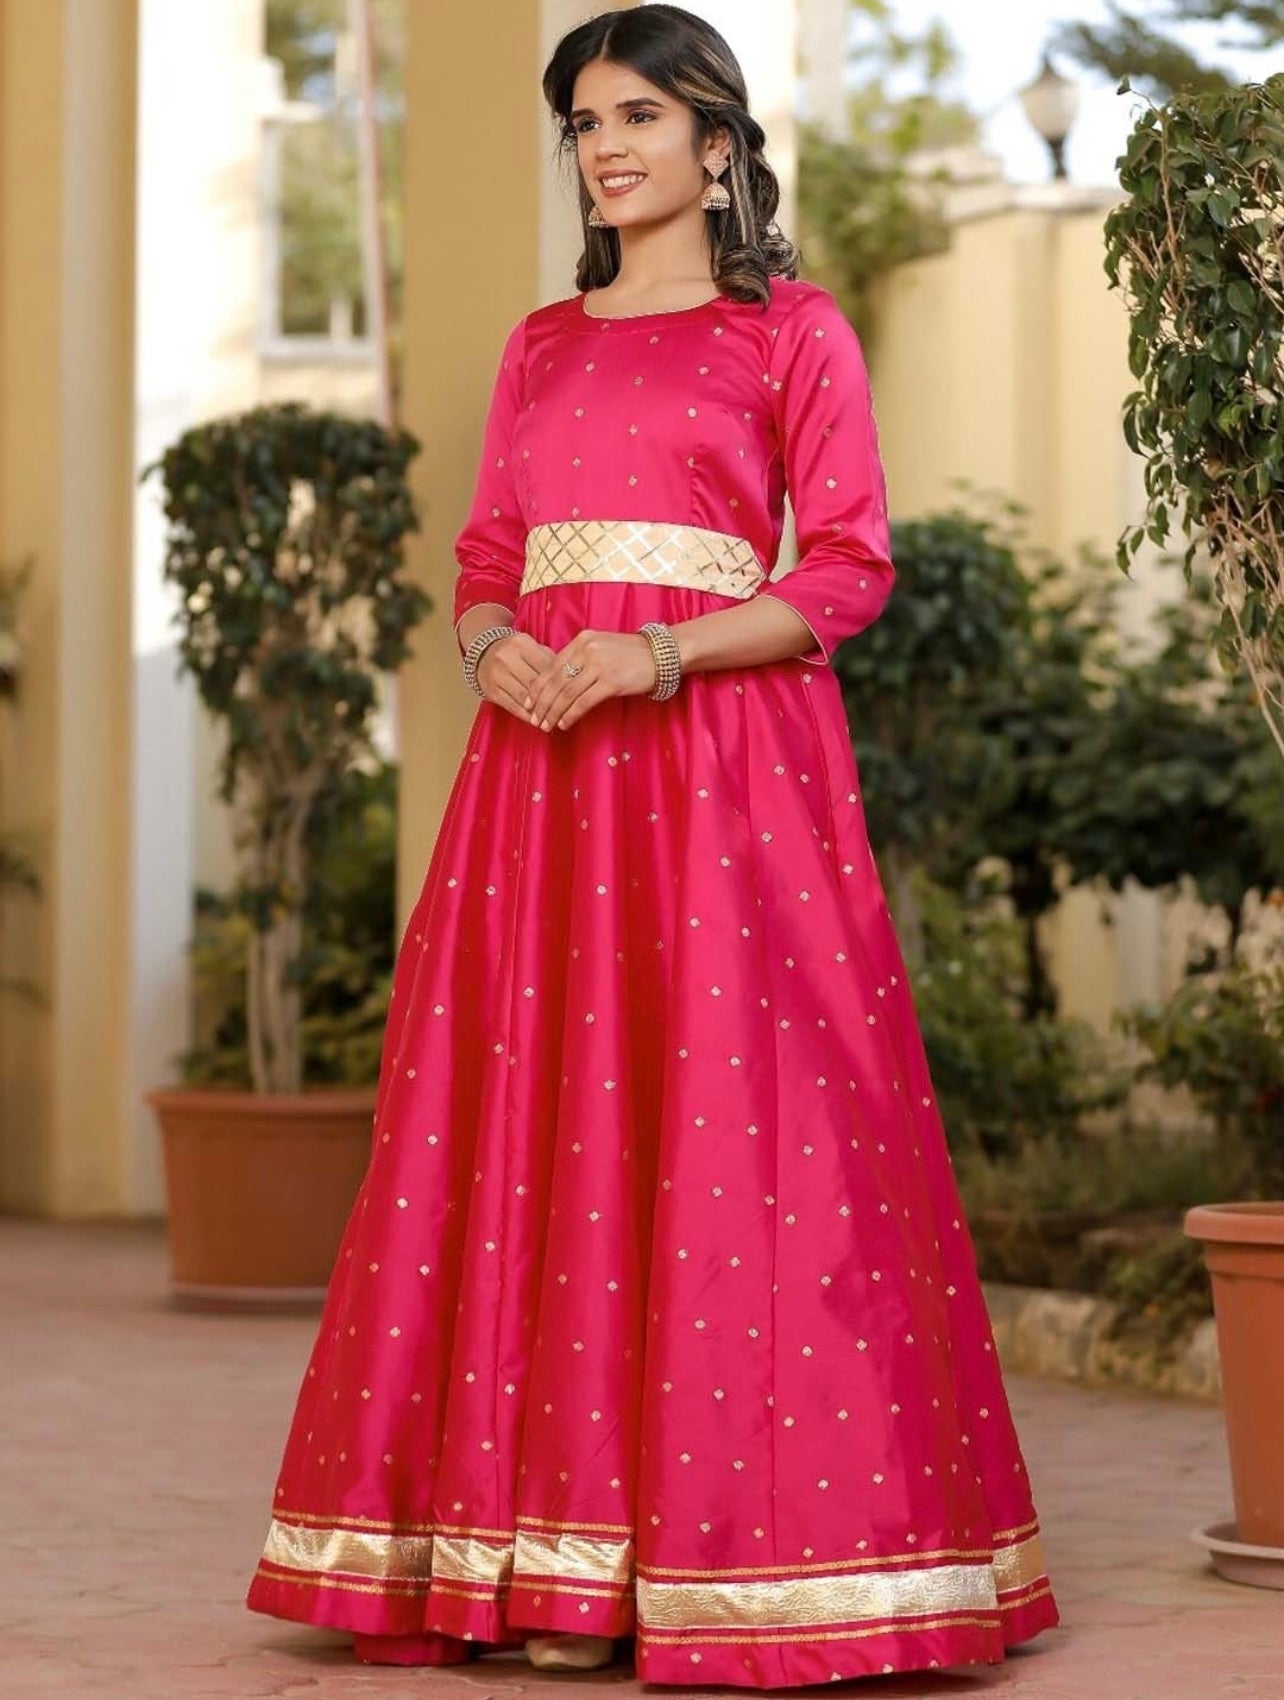 Pink Ethnic Maxi Gown with Embellished Belt